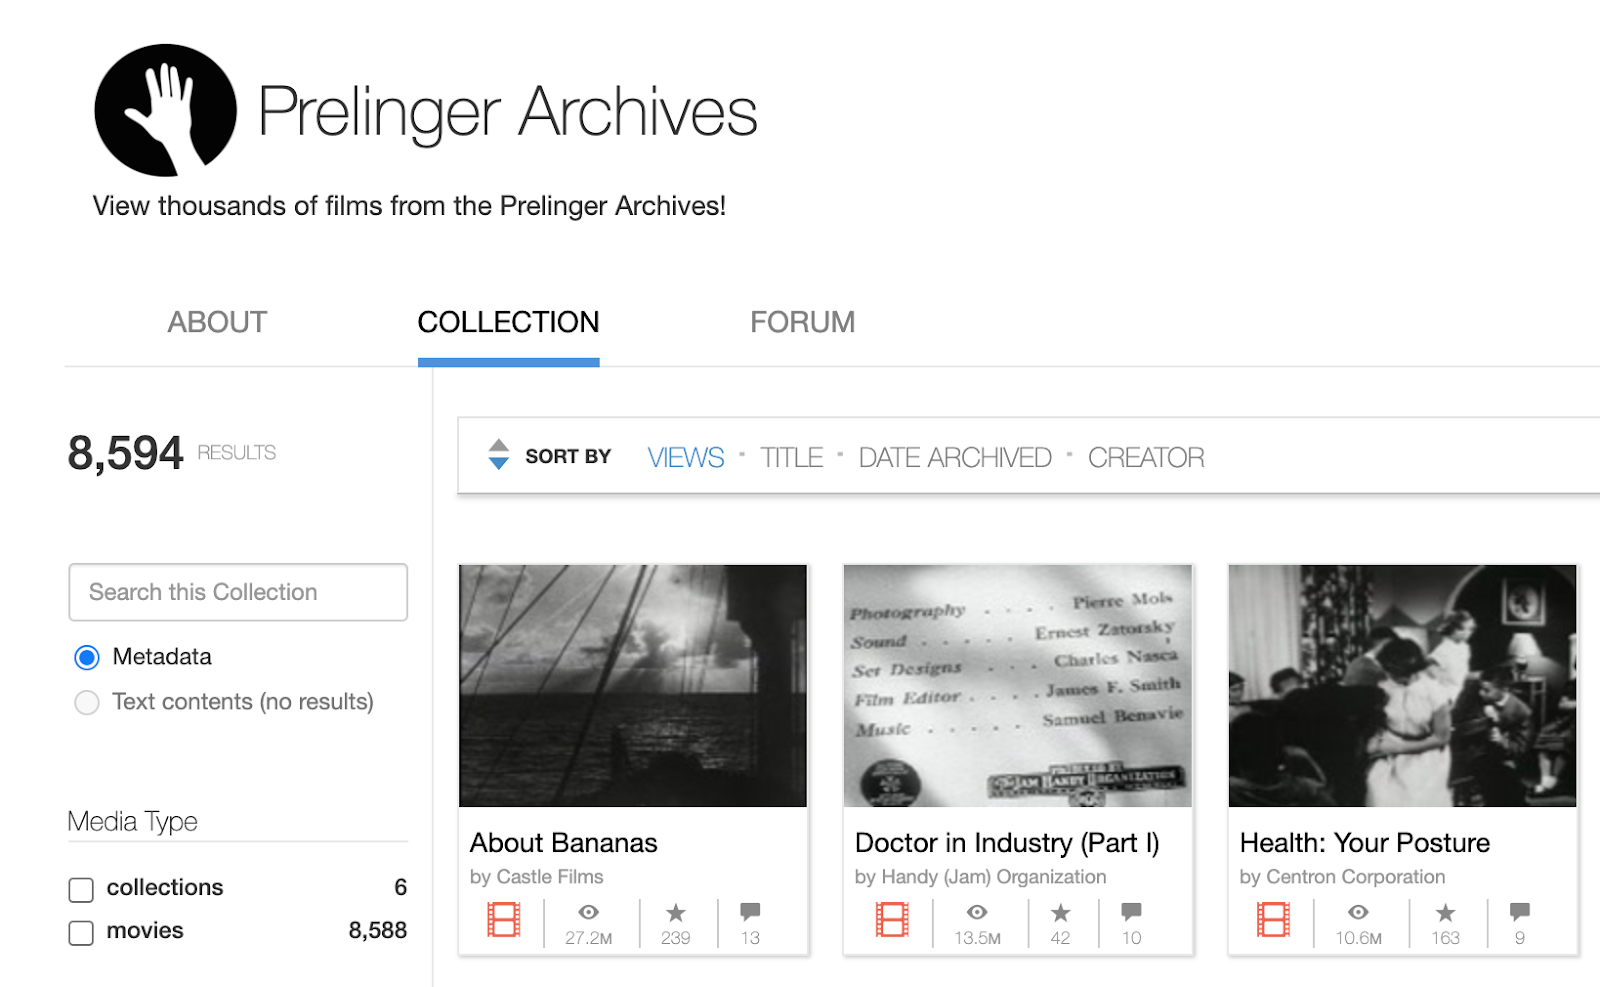 Homepage of the Prelinger Archives, with the Collection tab selected and showing thumbnails of videos titled About Bananas, Doctors in Industry (Part 1), and Health: Your Posture.